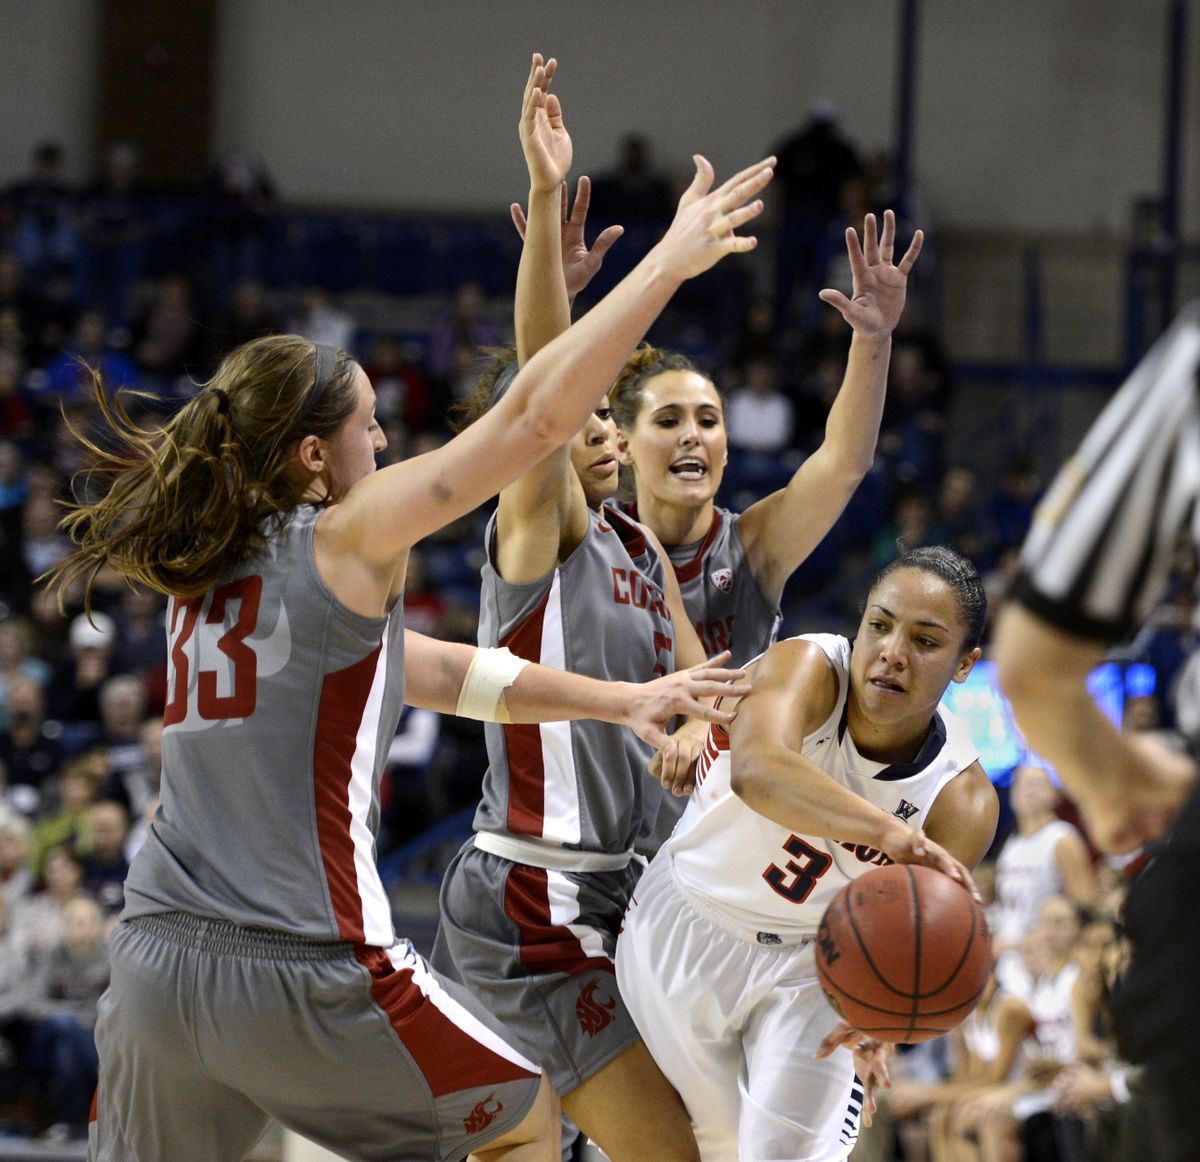 Gonzaga’s Haiden Palmer tries to beat the half-court pressure from, from left, Cougars Carly Noyes, Tia Presley and Brandi Thomas in the second half at the Zags’ McCarthey Athletic Center. (Dan Pelle)